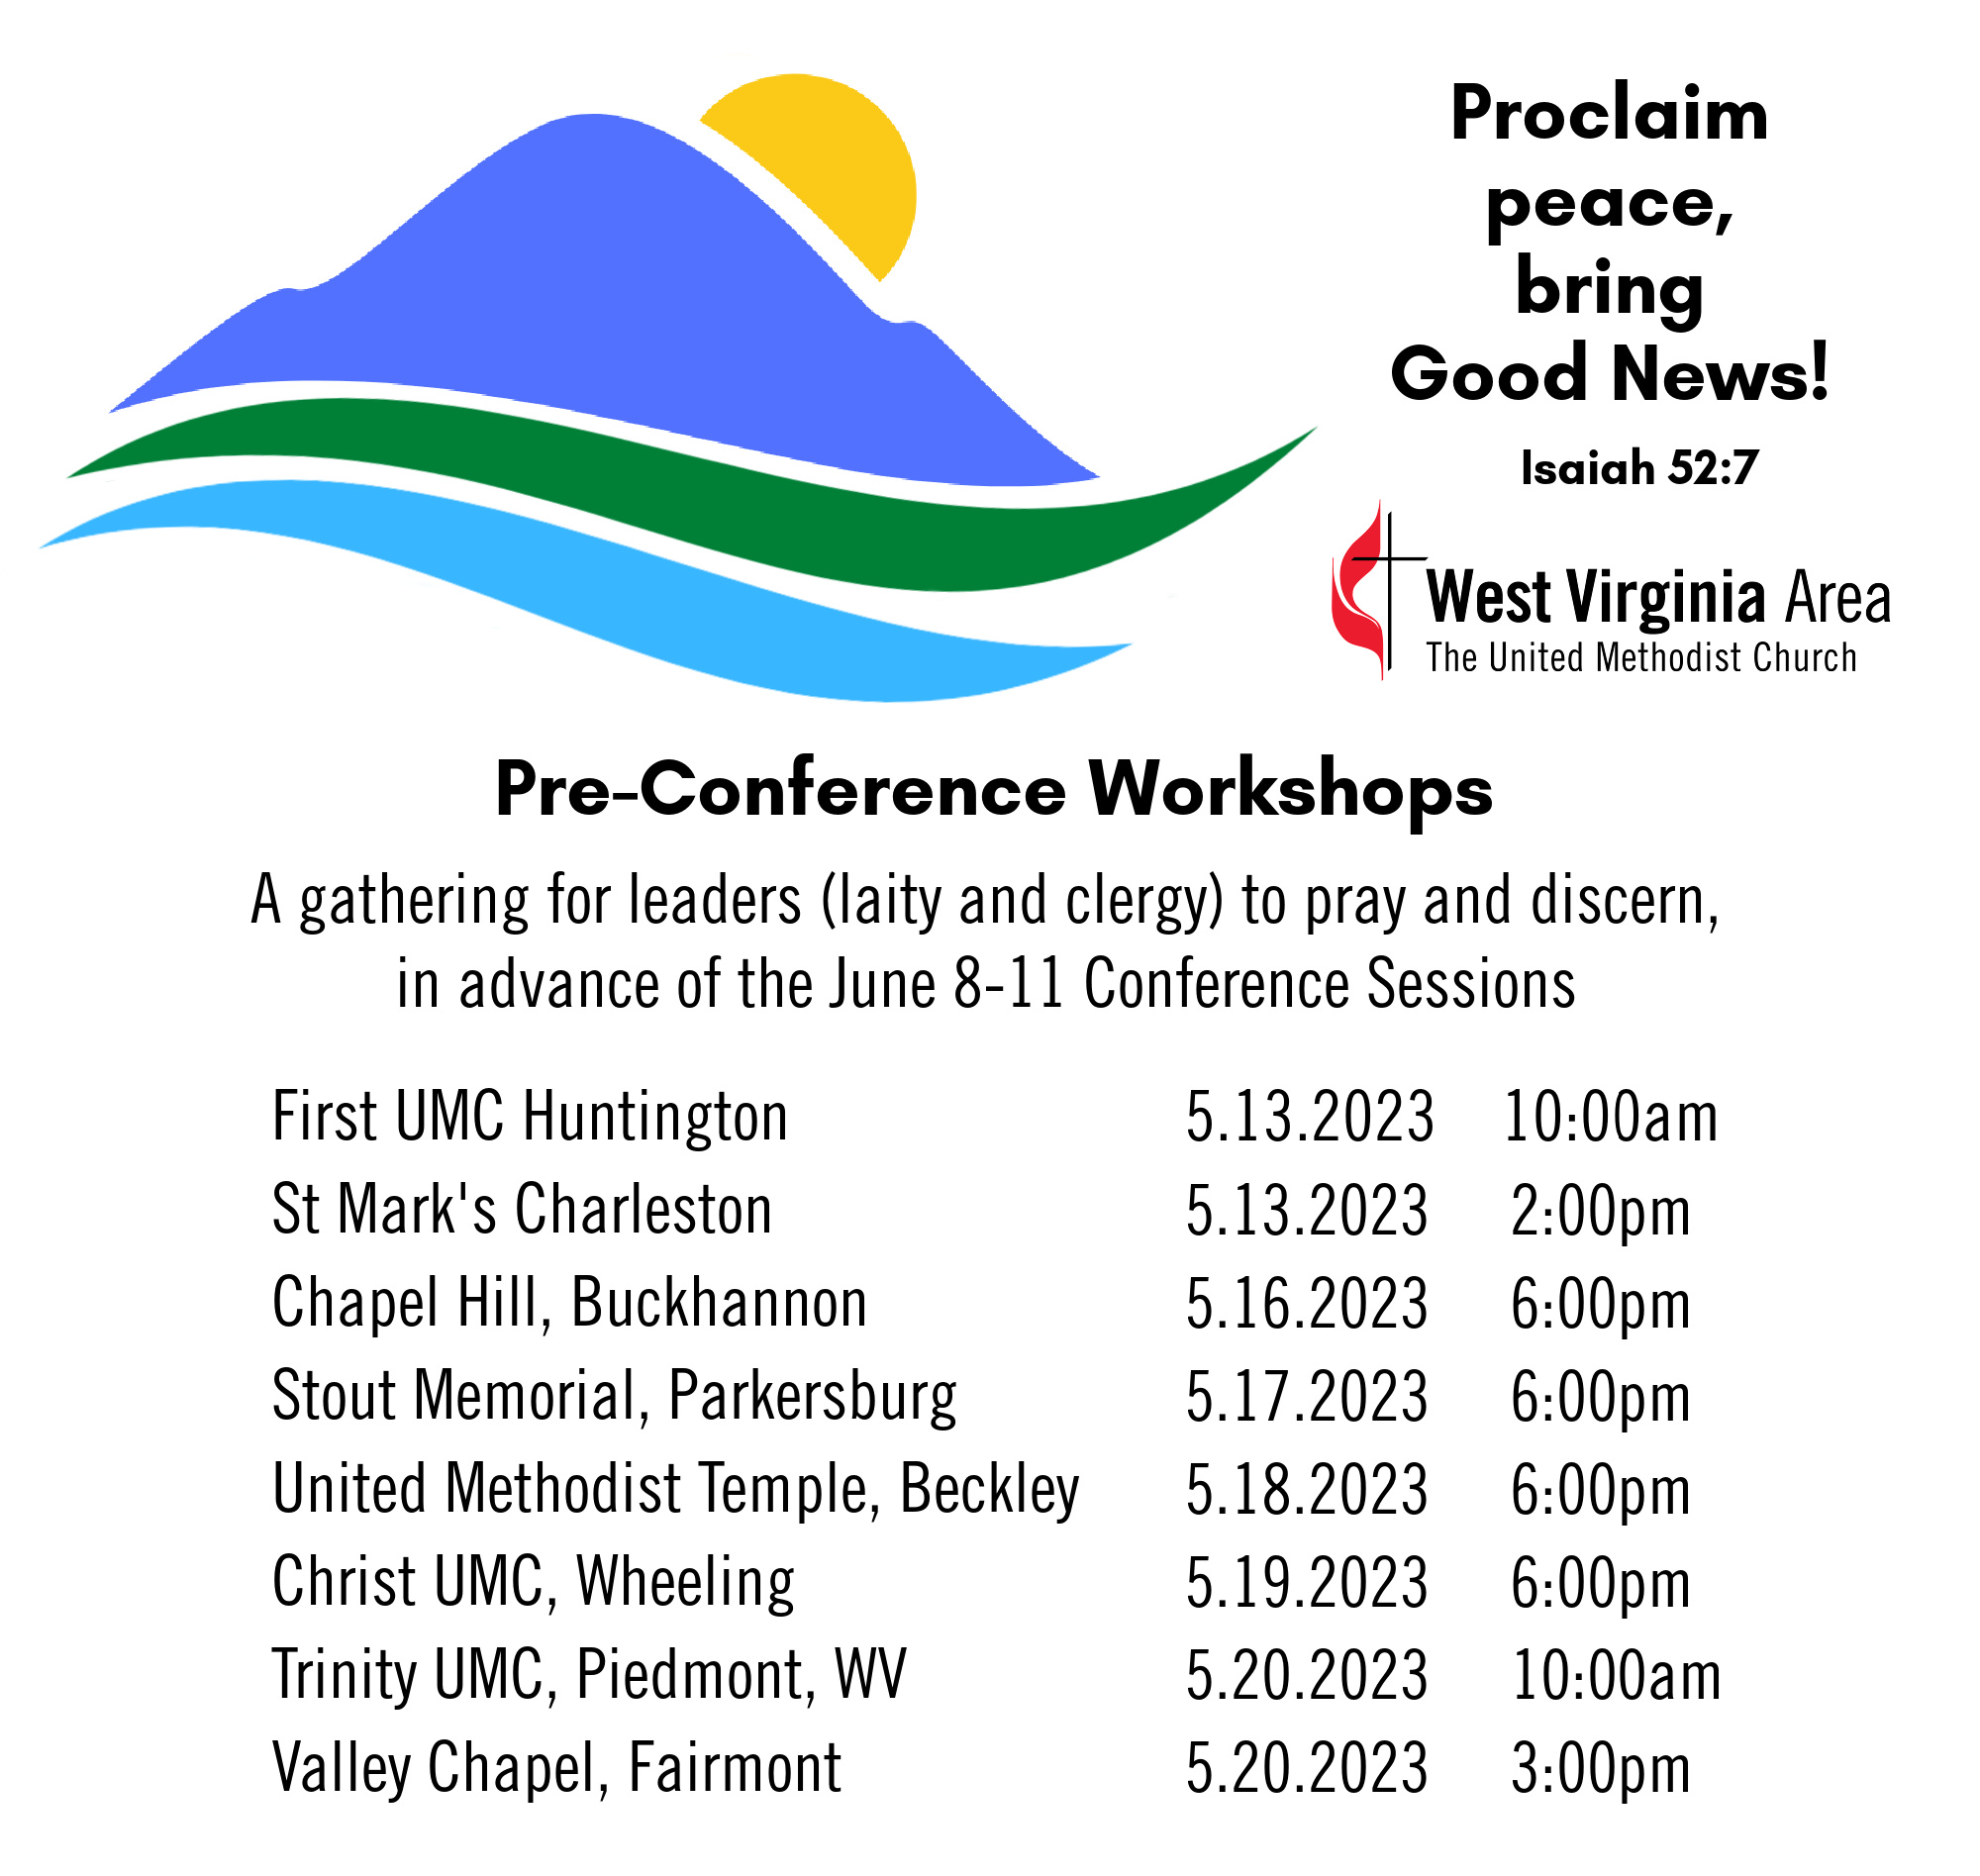 PreConference Sessions Scheduled For Members of the Annual Conference